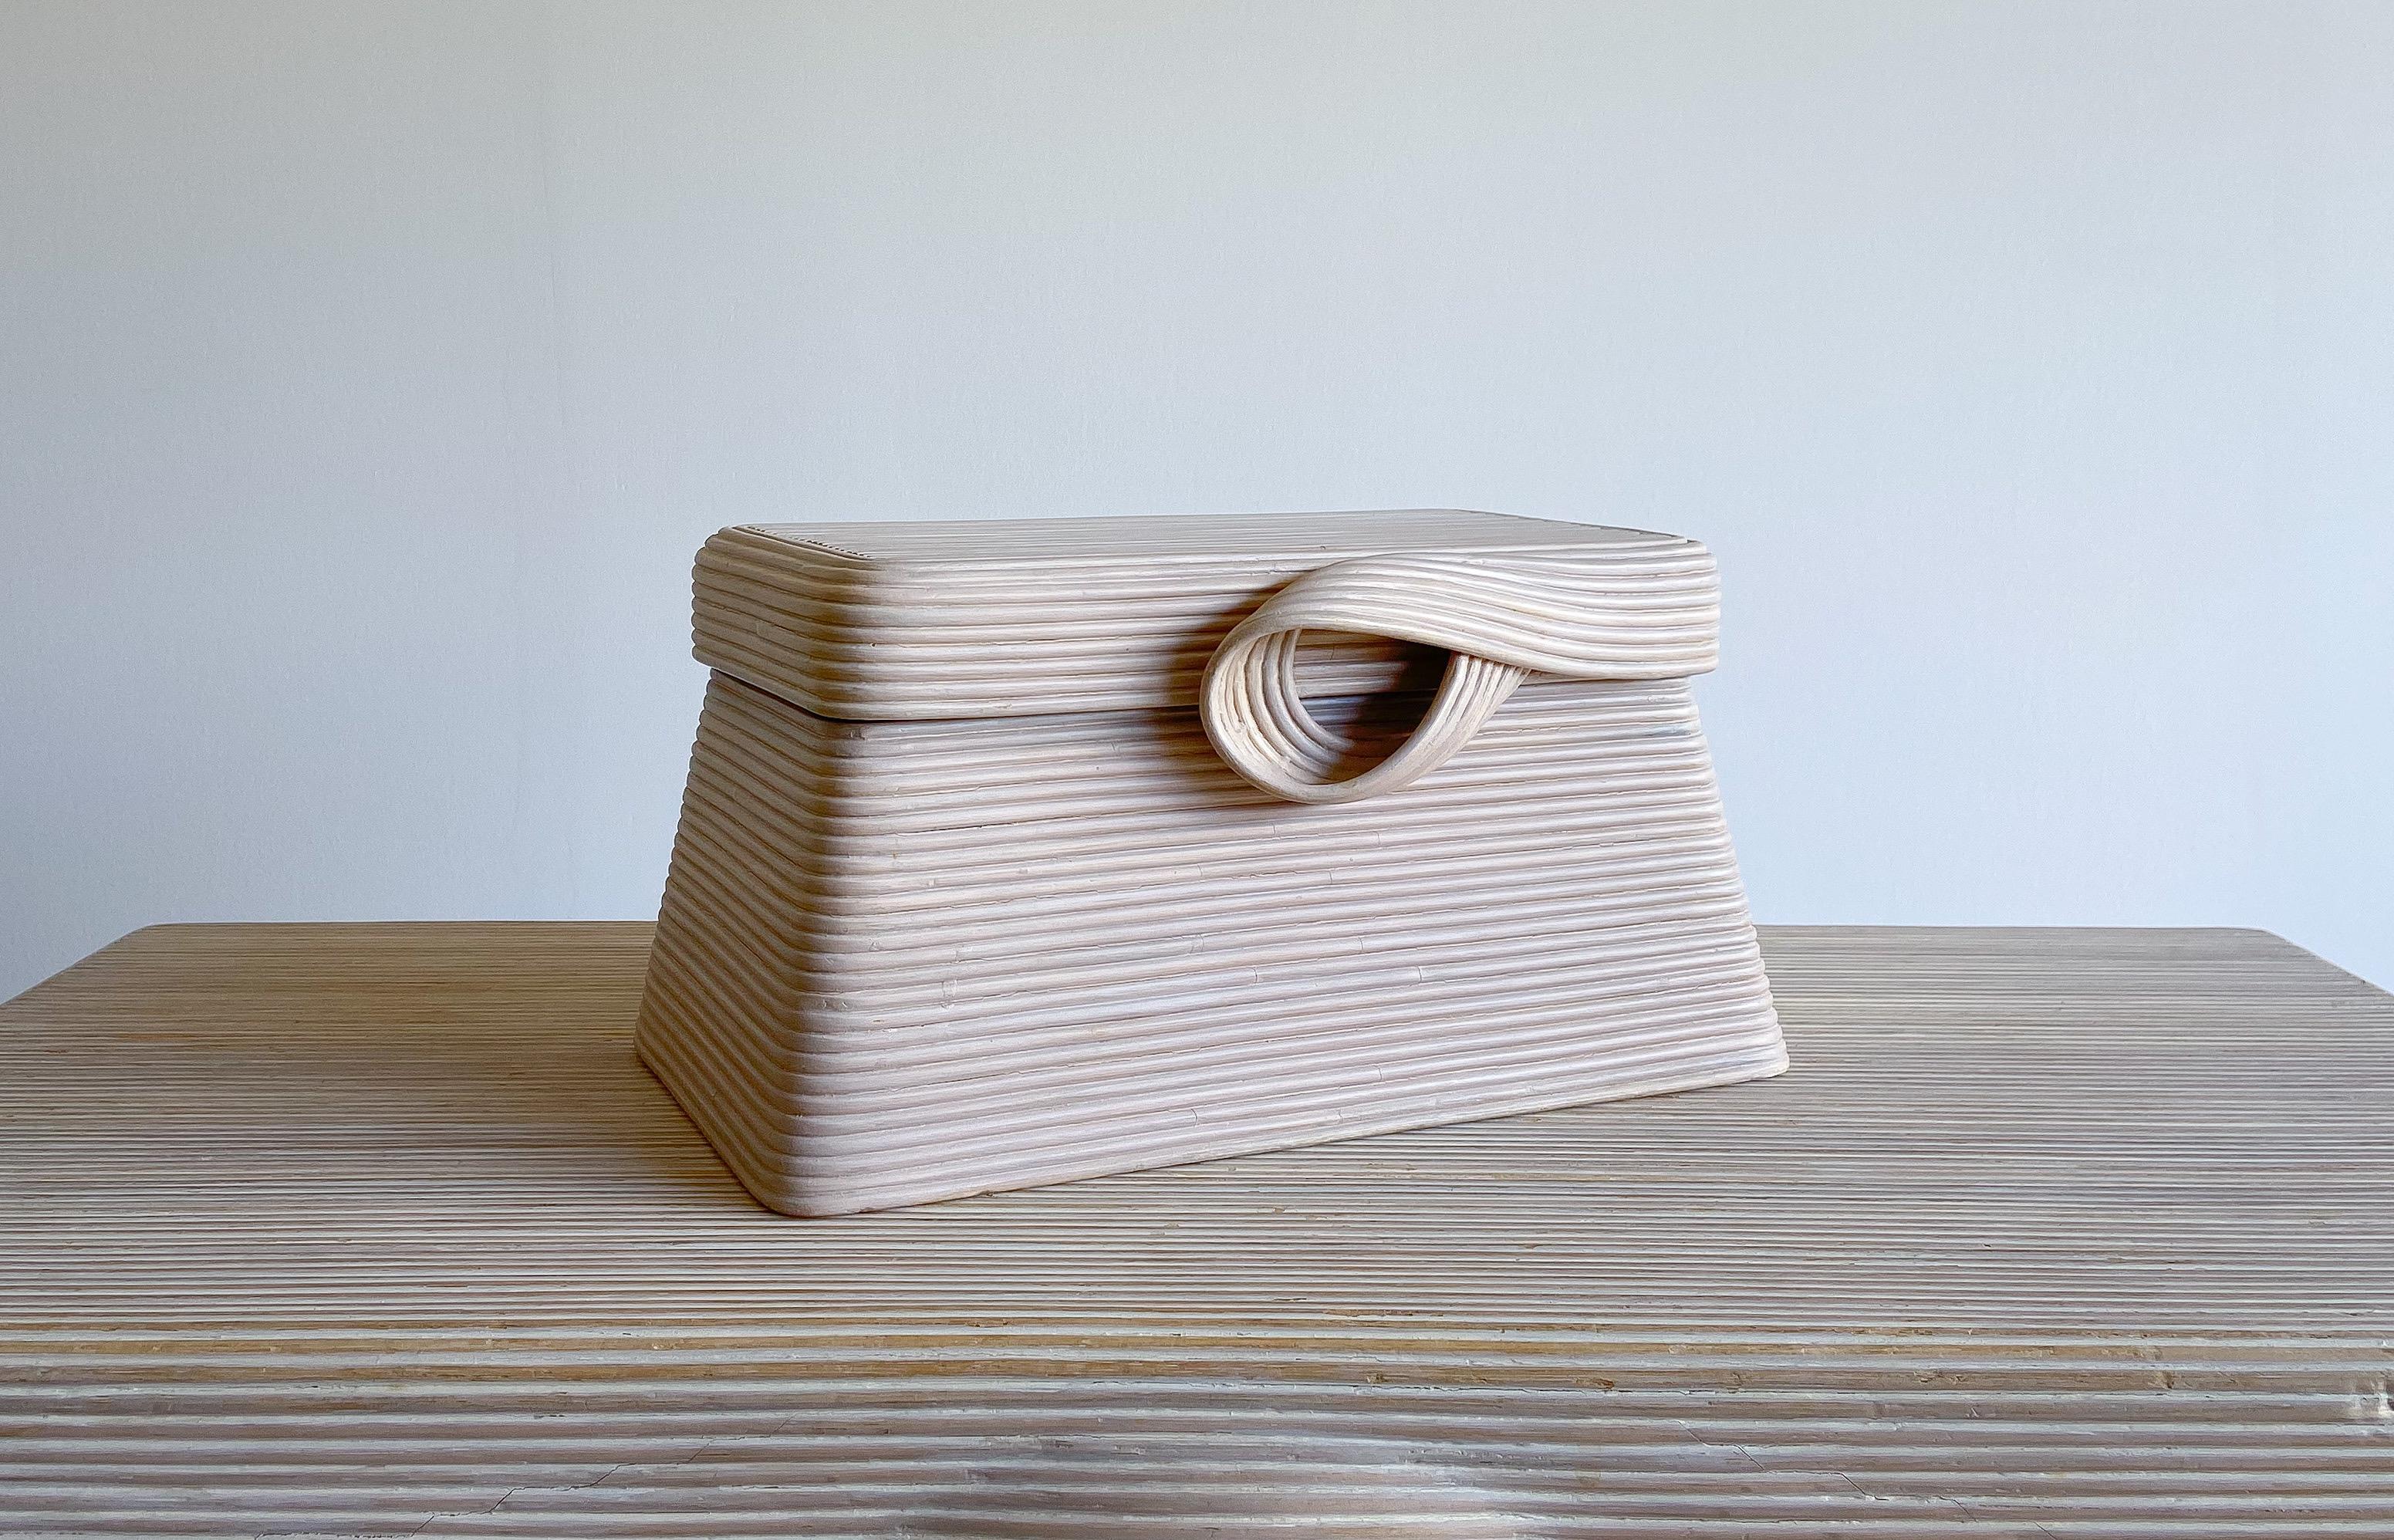 Offered is a lovely sculptural split reed decorative box designed by Betty Cobonpue for her 